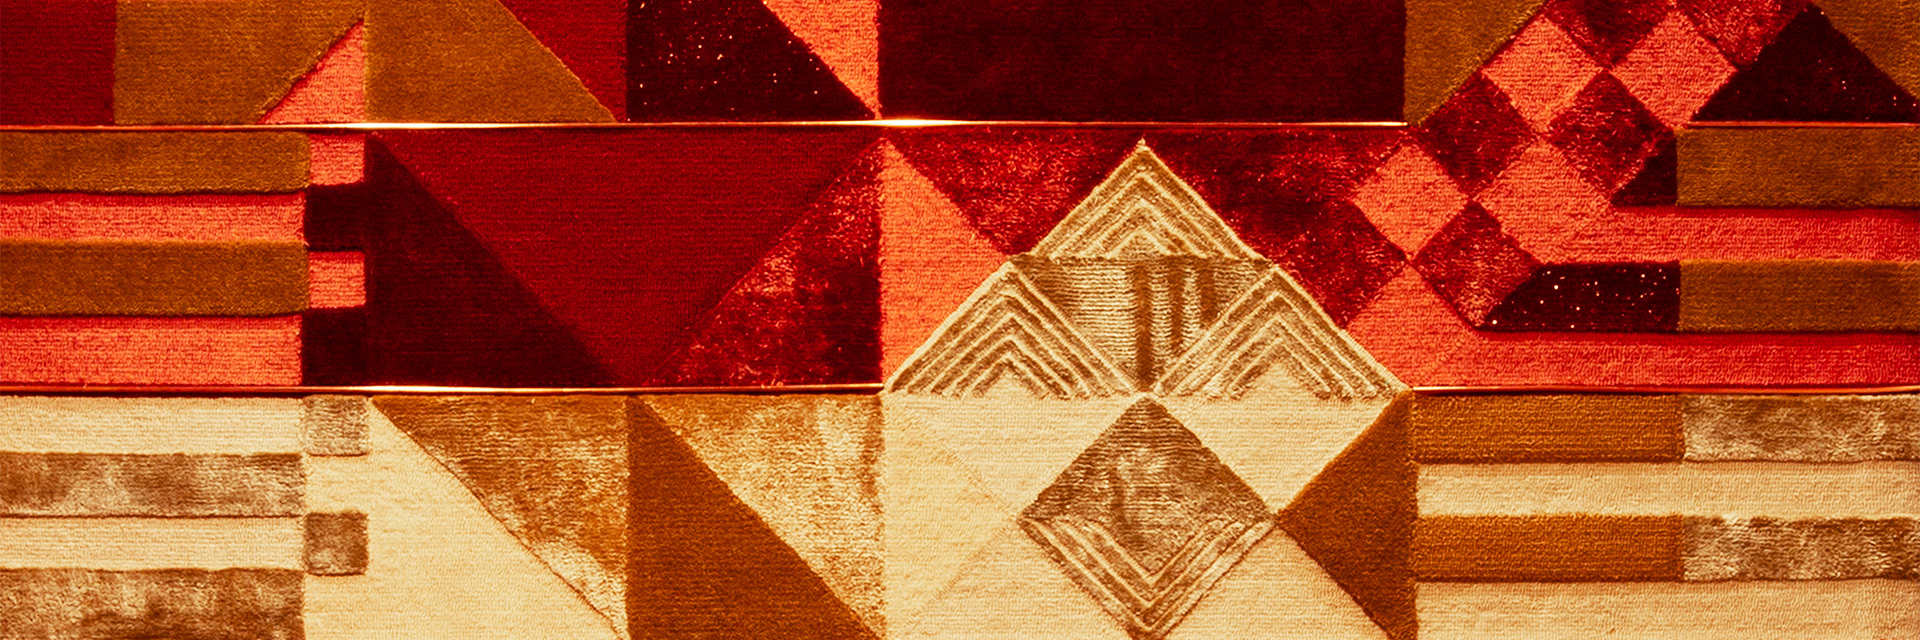 red and tan pattern